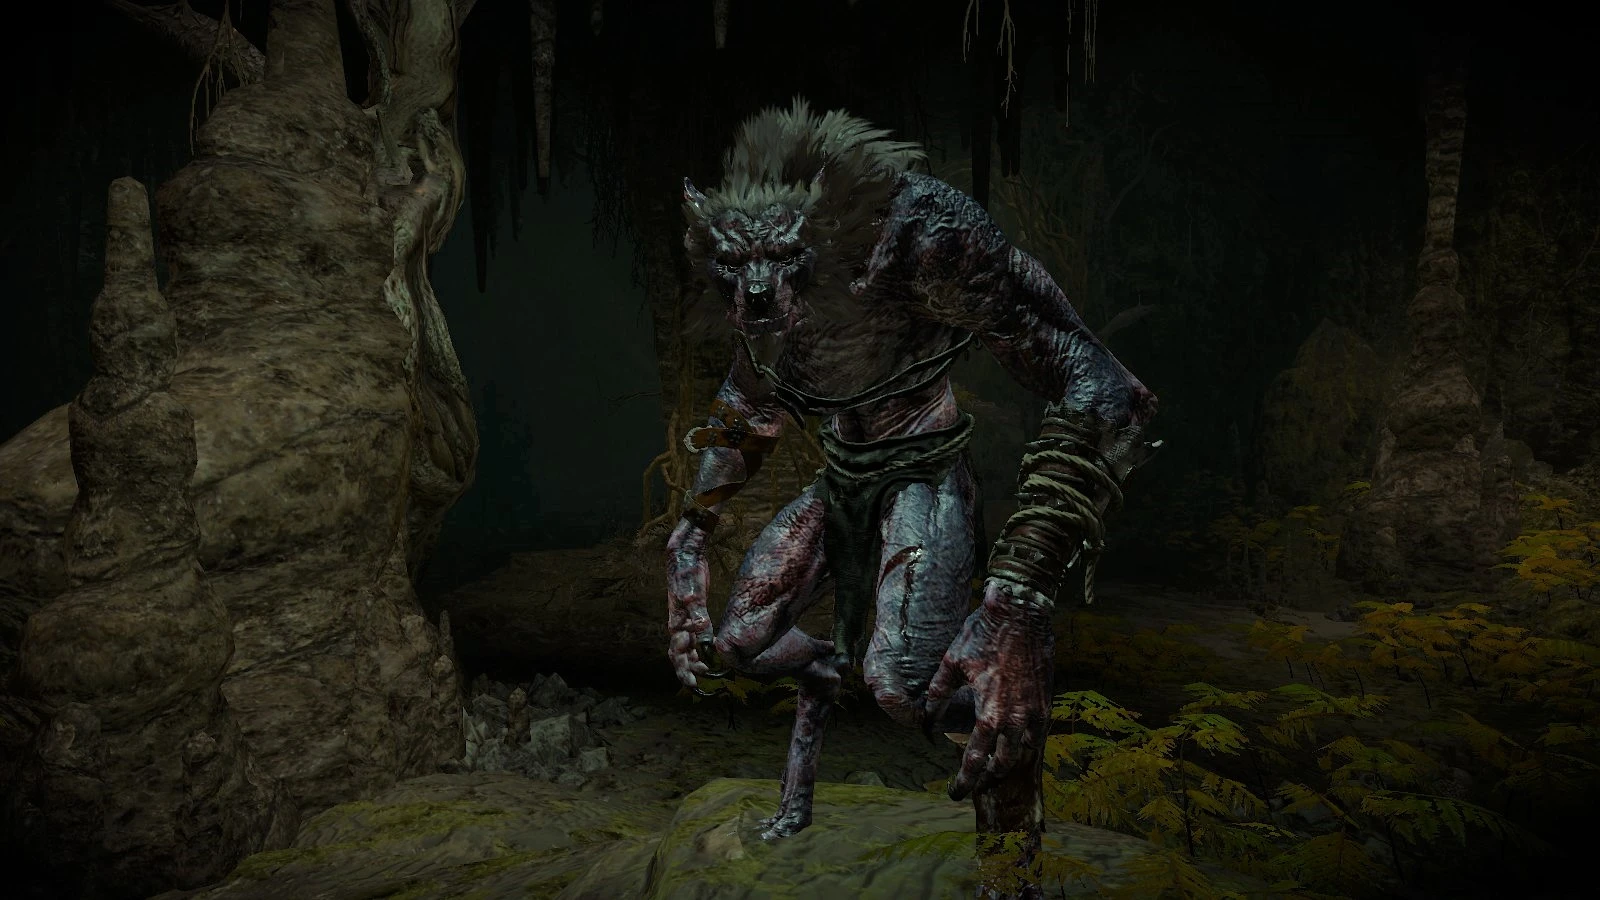 how do i spare the woman and kill the werewolf in wild at heart in witcher 3